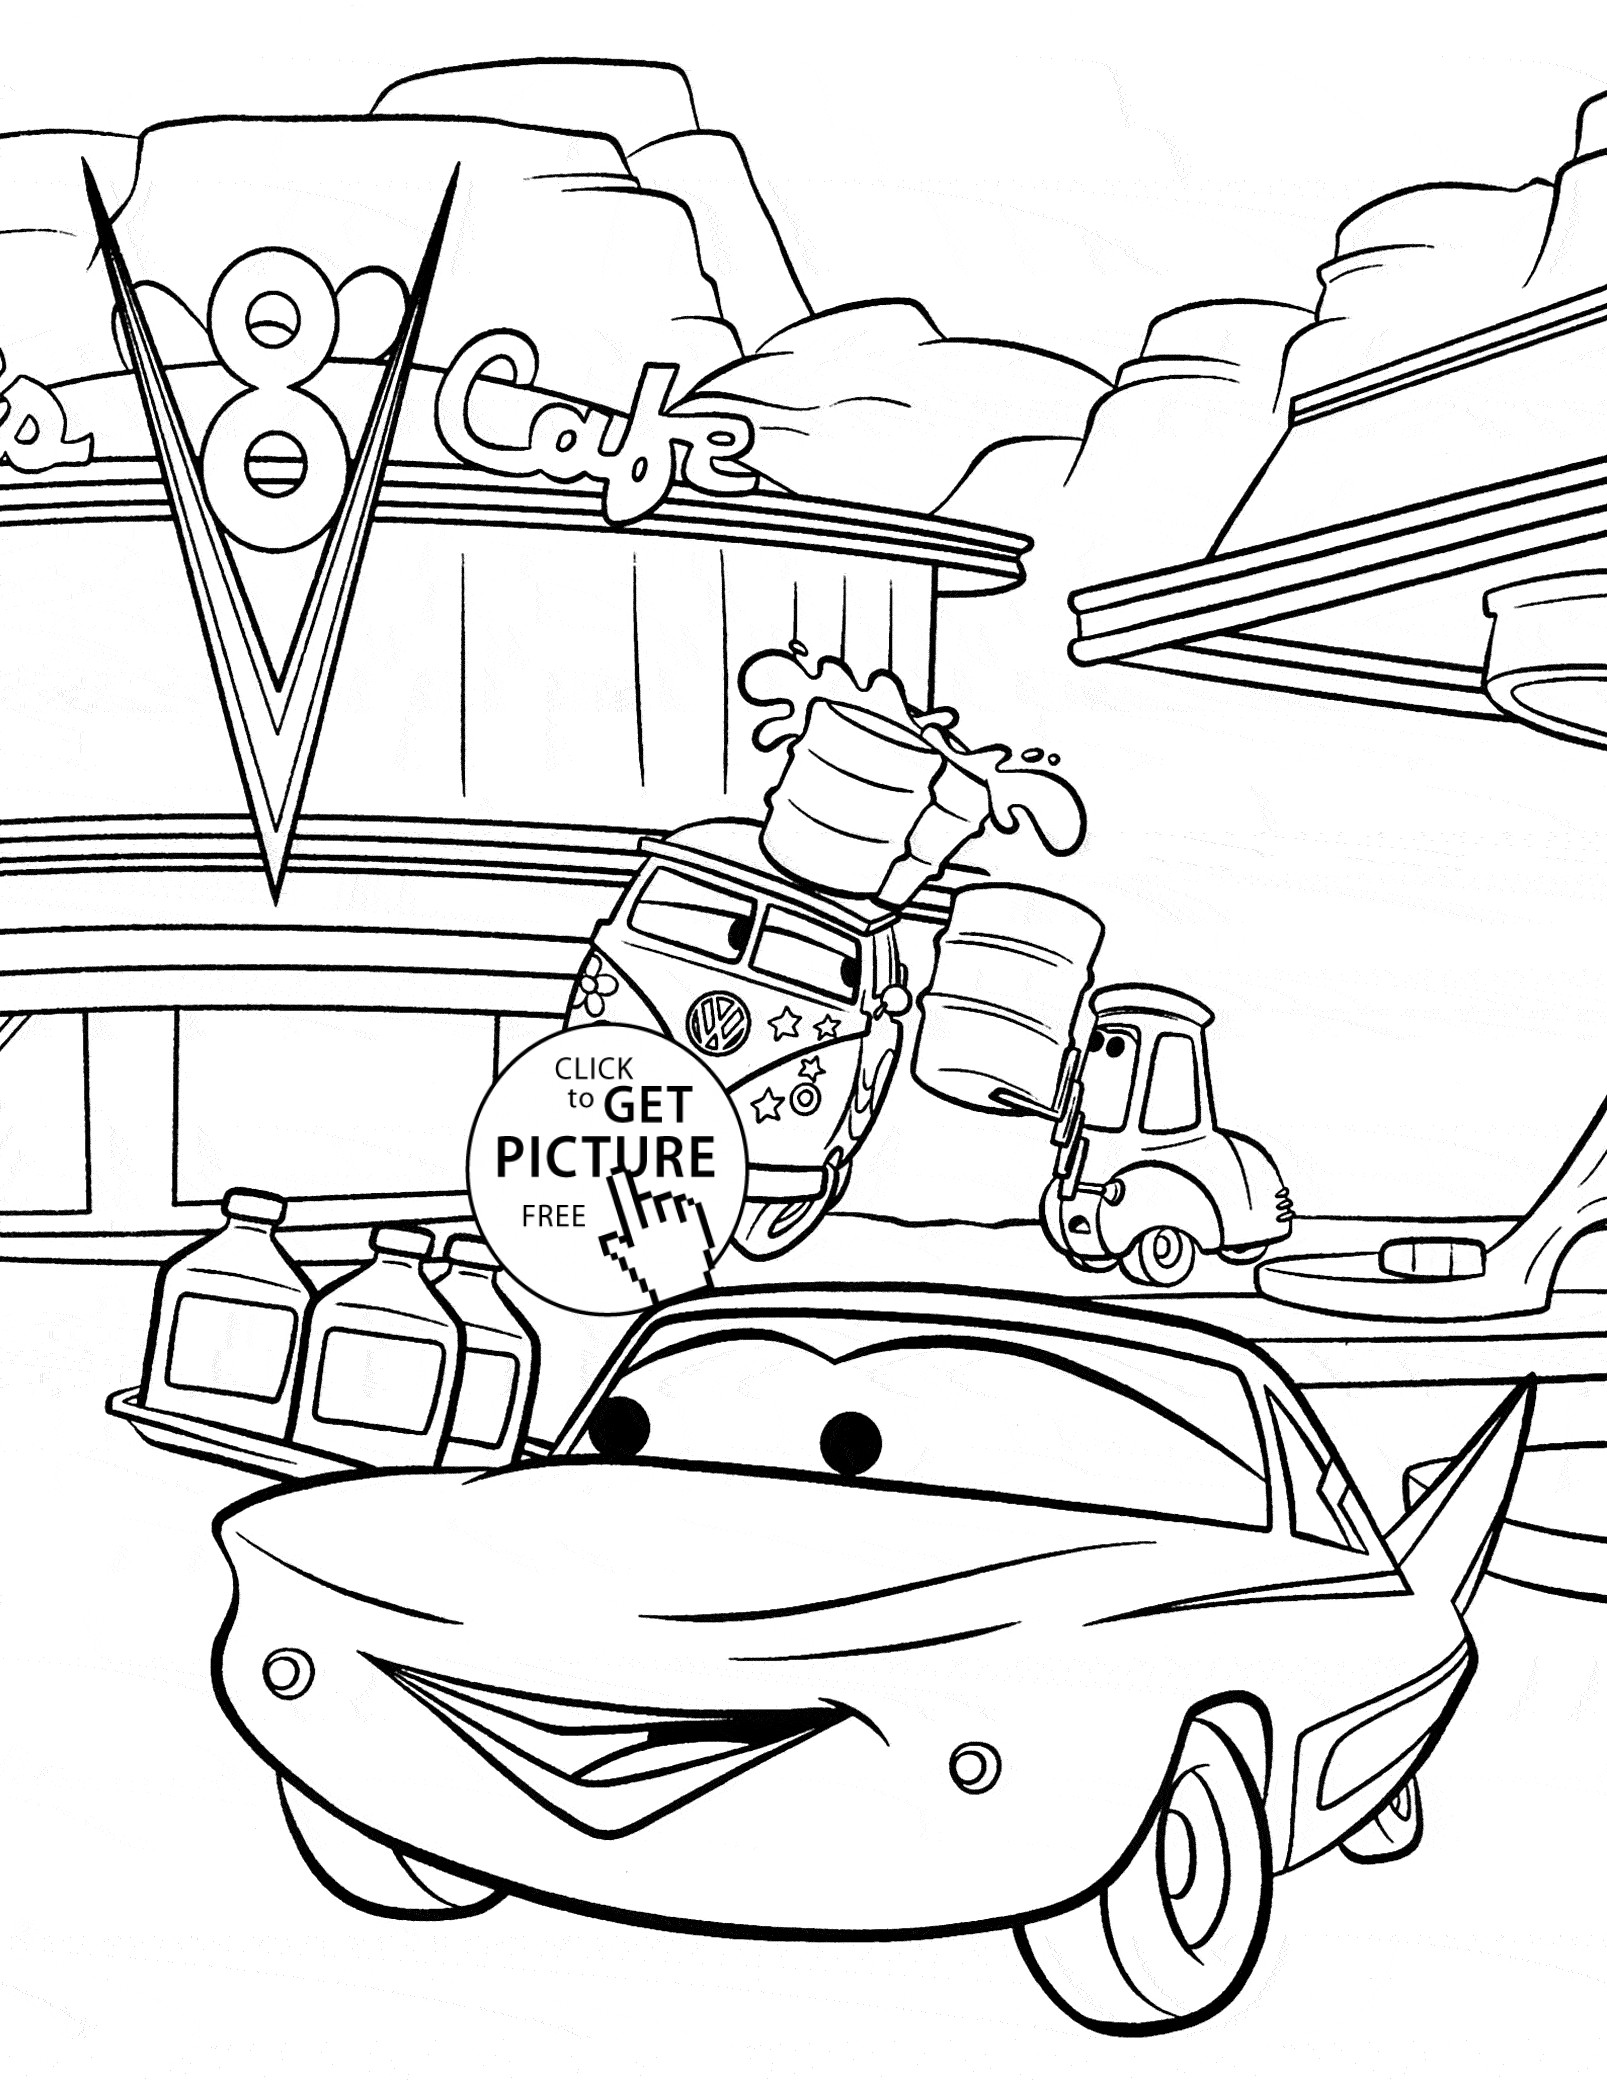 Coloring Pages For Boys Cars 32
 Cars cafe 8 coloring page for kids disney coloring pages